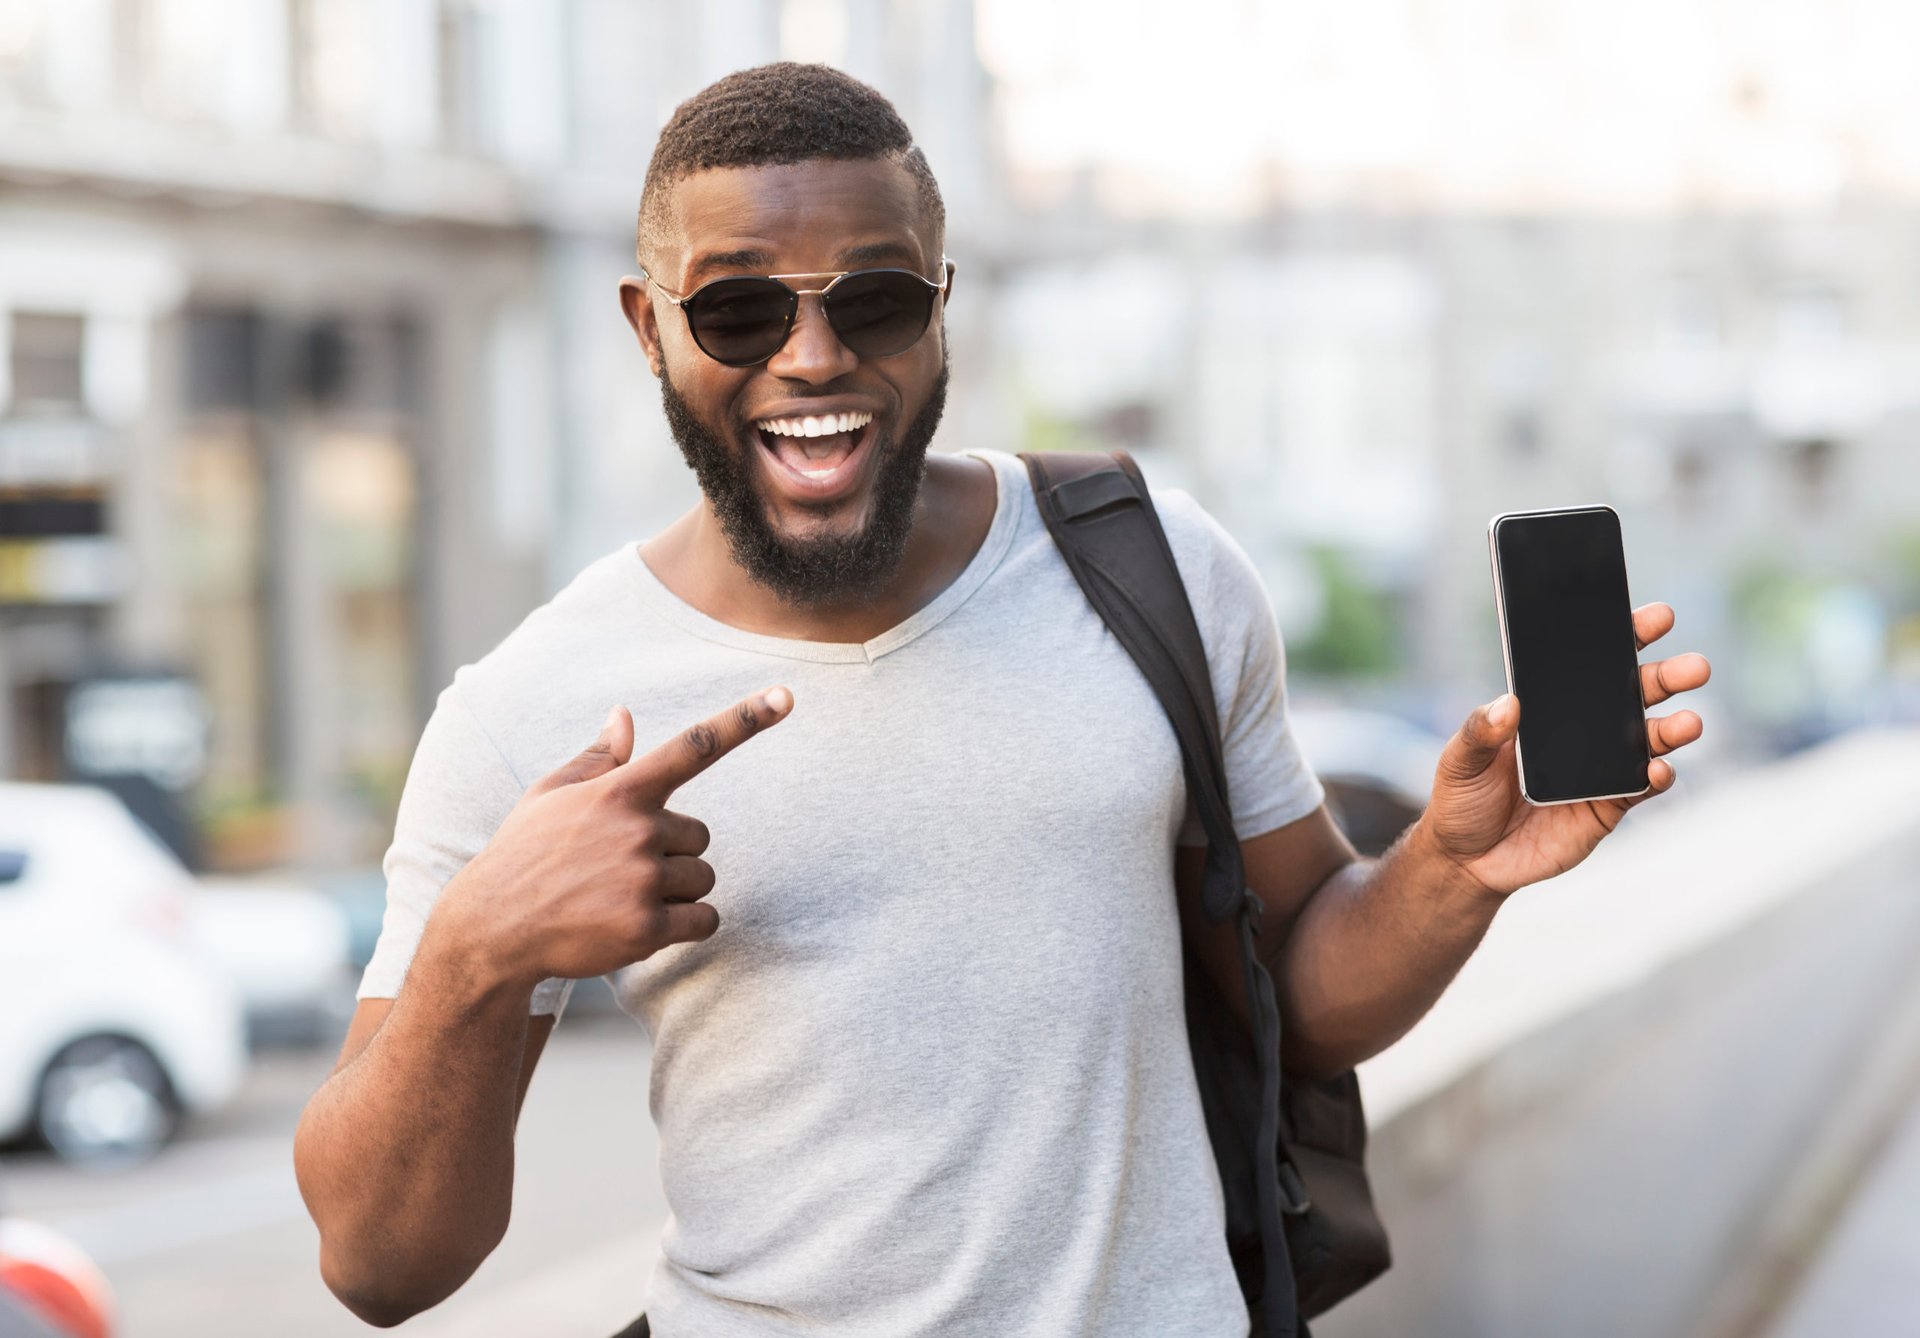 A Black man in sunglasses and a t-shirt excitedly points at his new cell phone